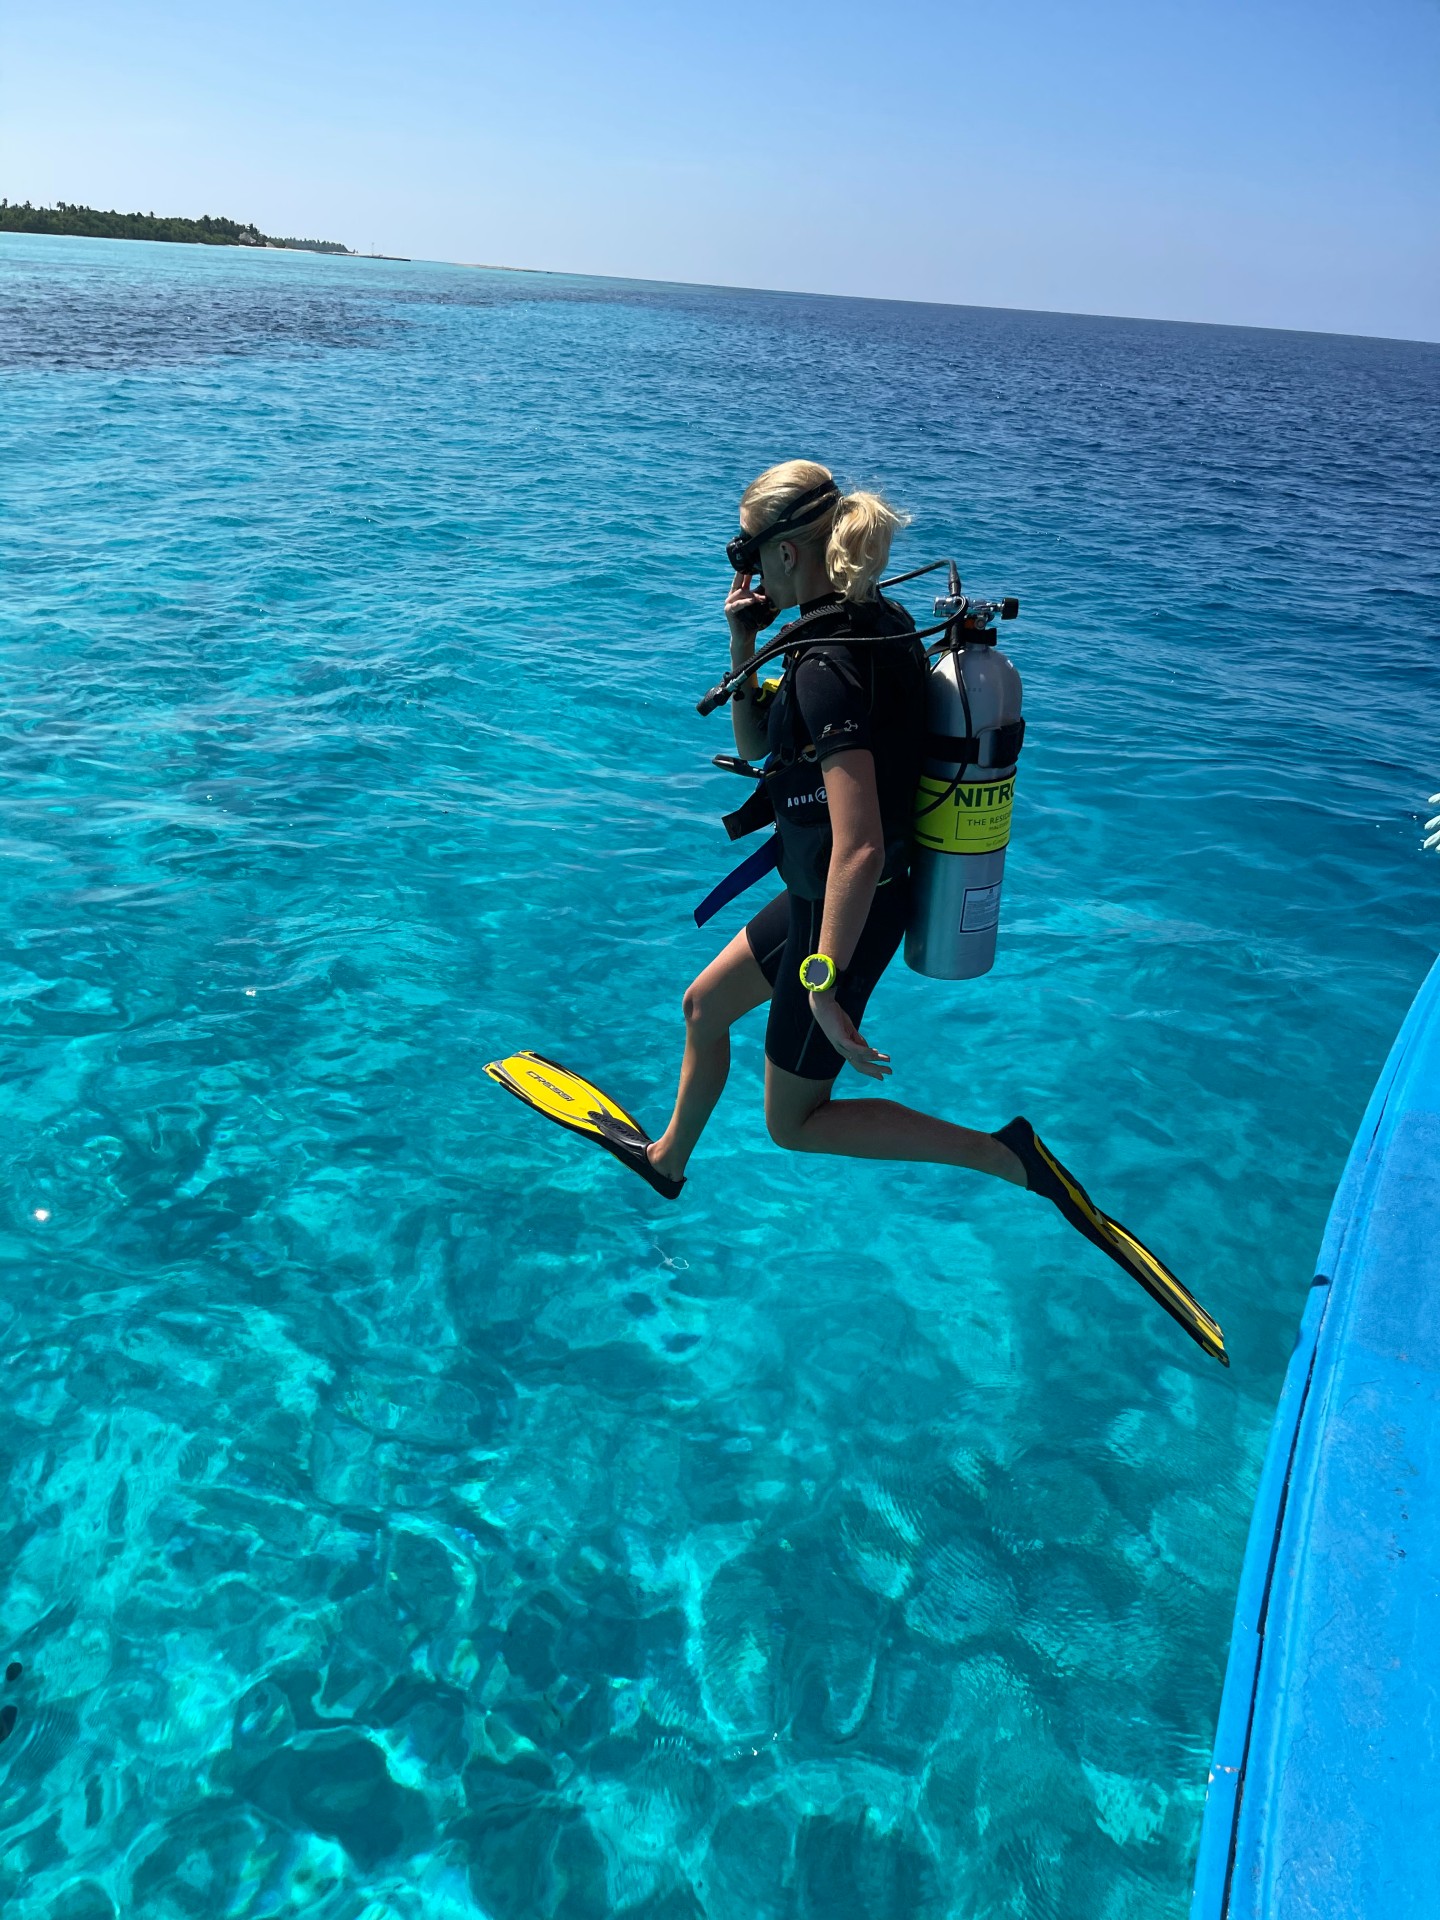 https://www.zannavandijk.co.uk/beginners-guide-to-scuba-diving/ing into the sea with scuba diving pack